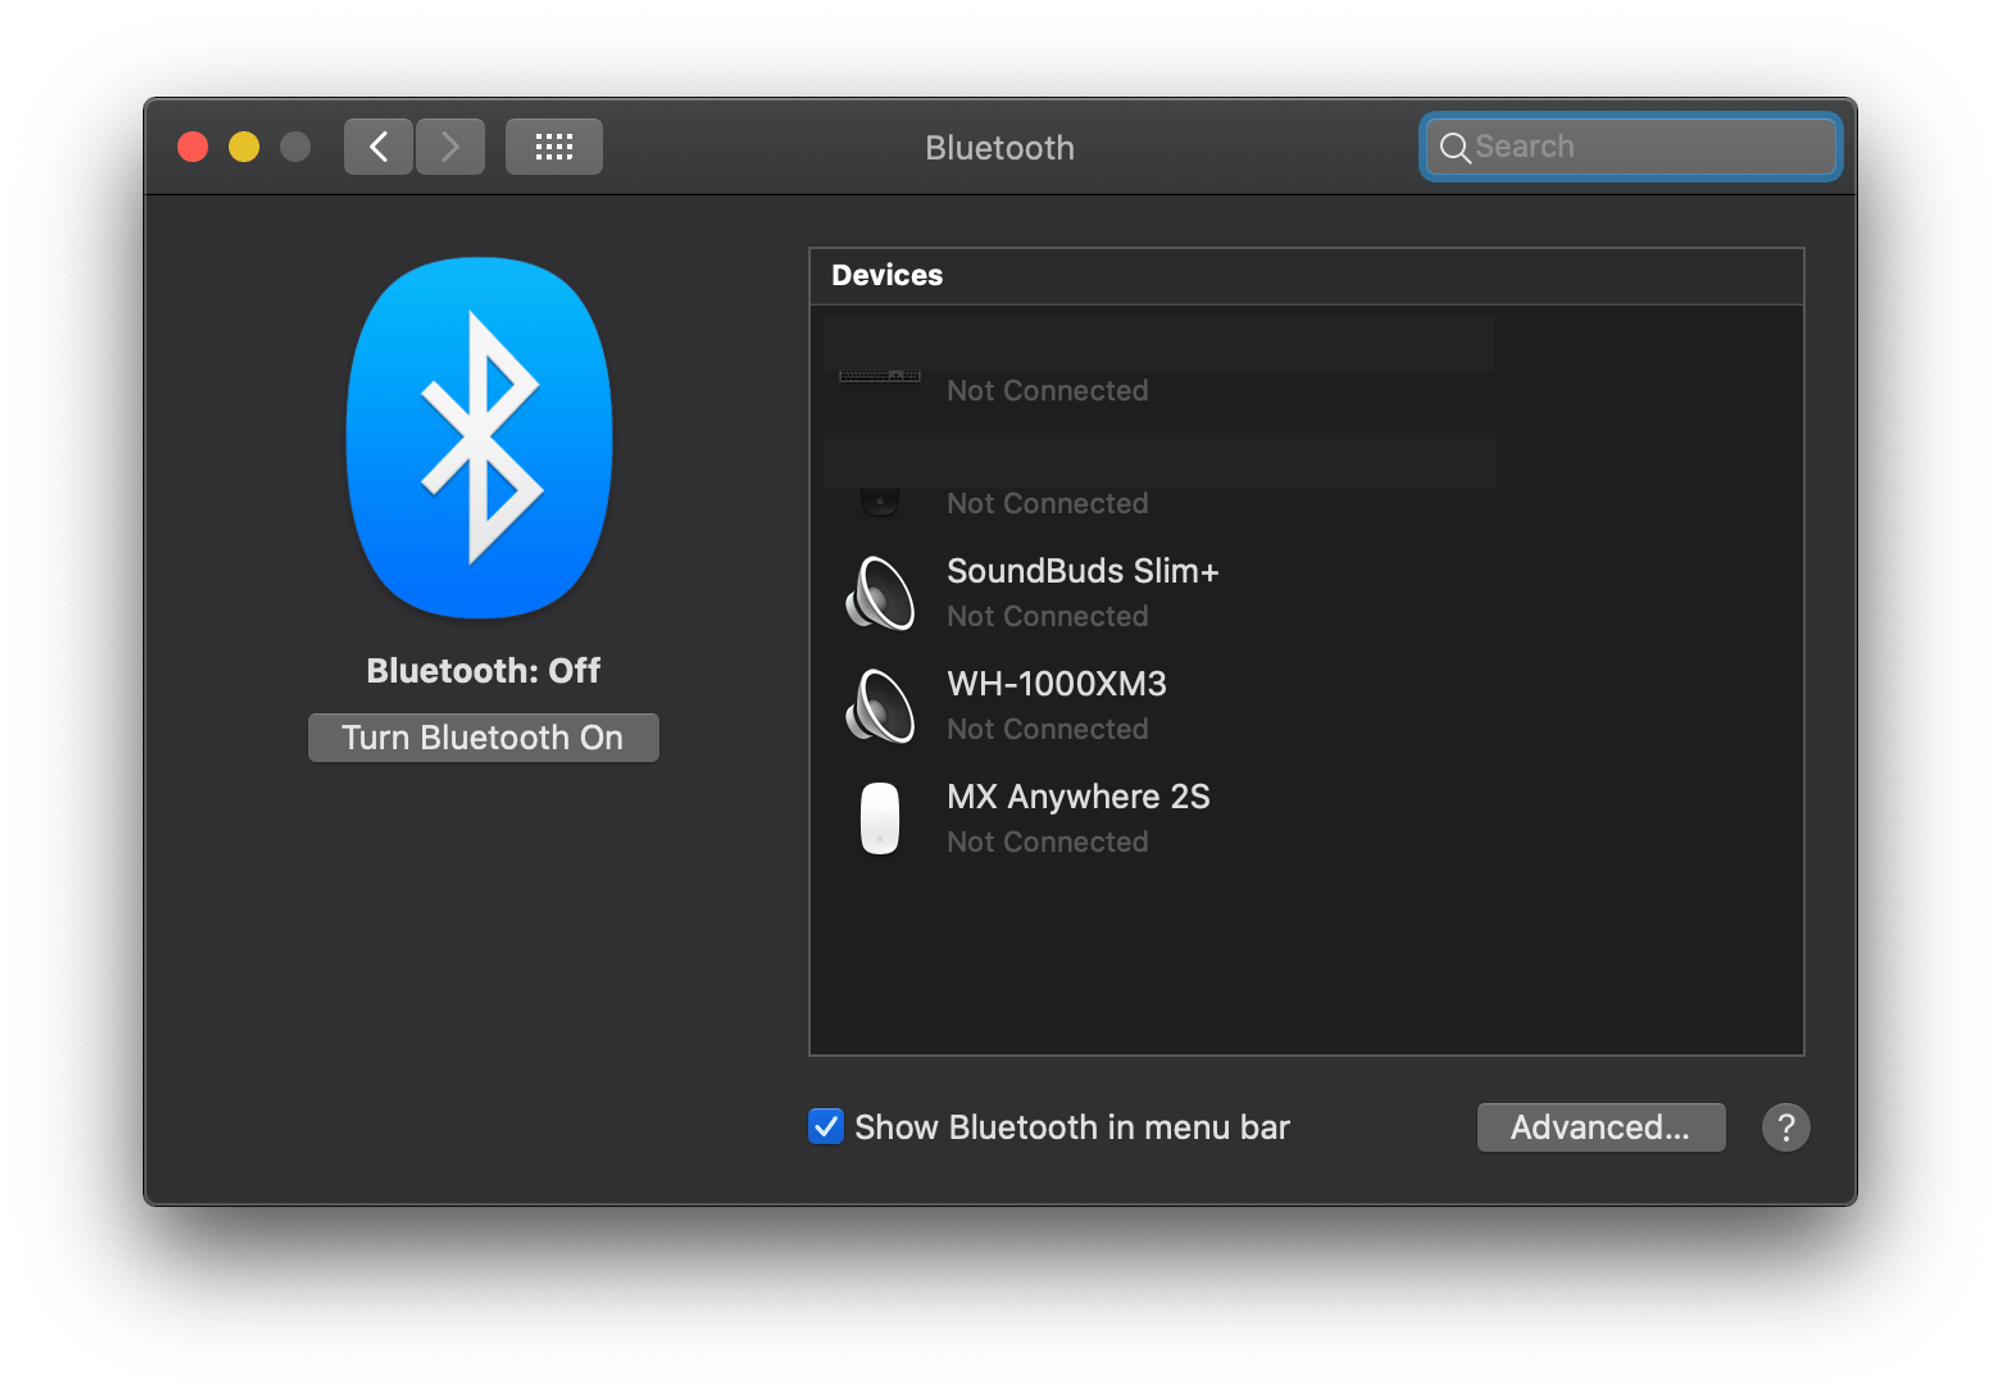 Check that 'Show Bluetooth in menu bar' is enabled in System Preferences